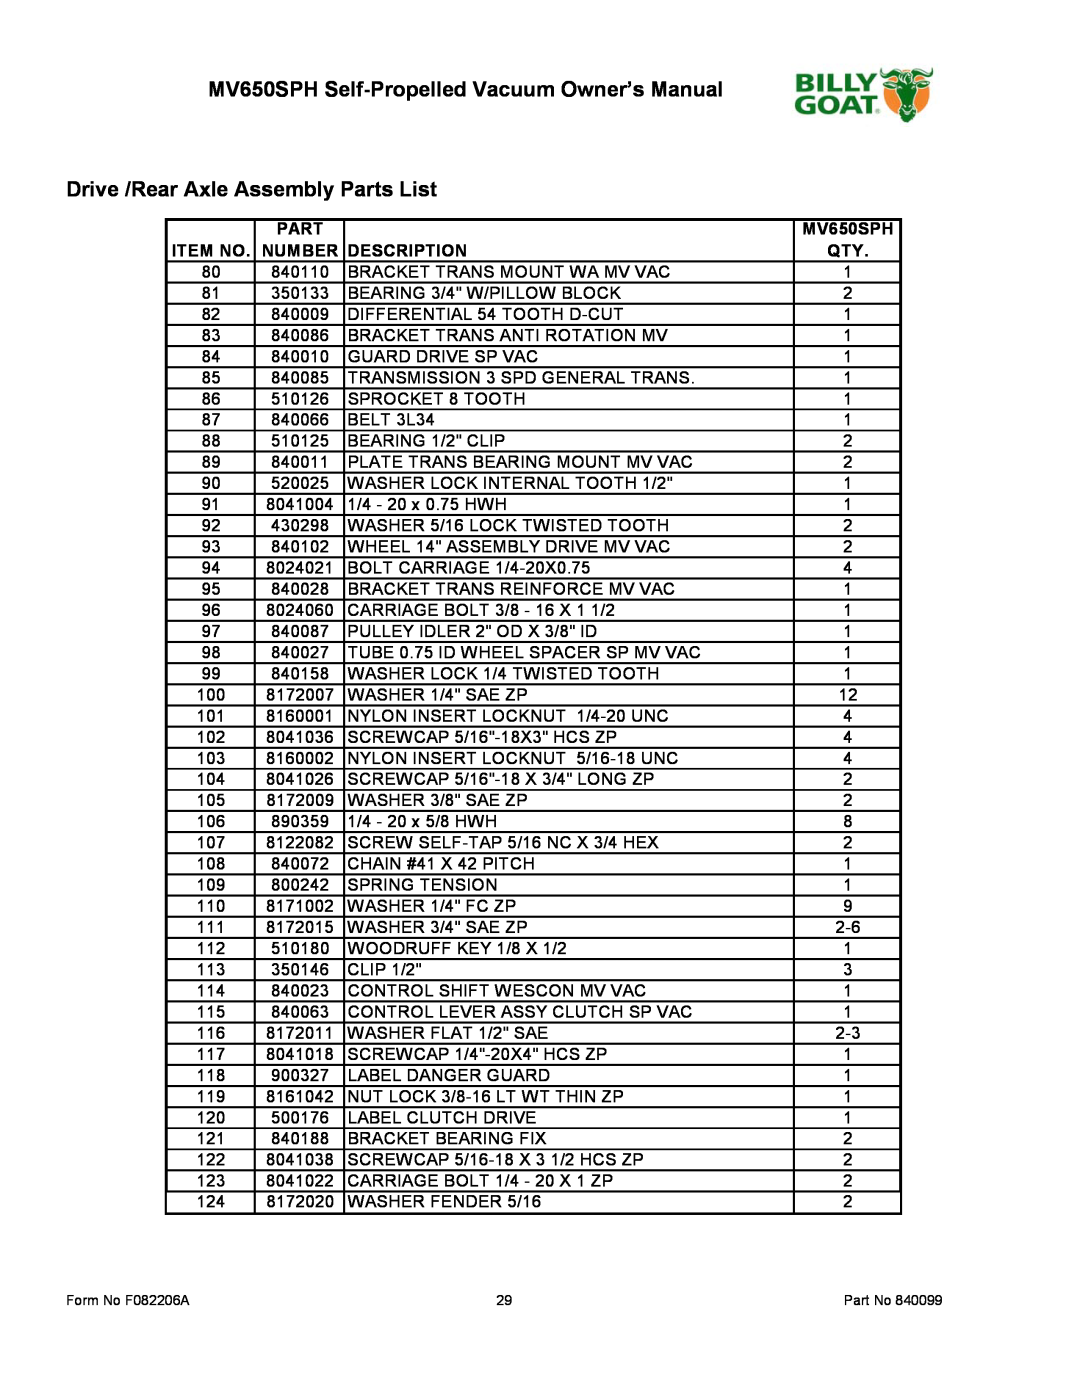 Billy Goat Drive /Rear Axle Assembly Parts List, MV650SPH Self-Propelled Vacuum Owner’s Manual, Item No, Number 